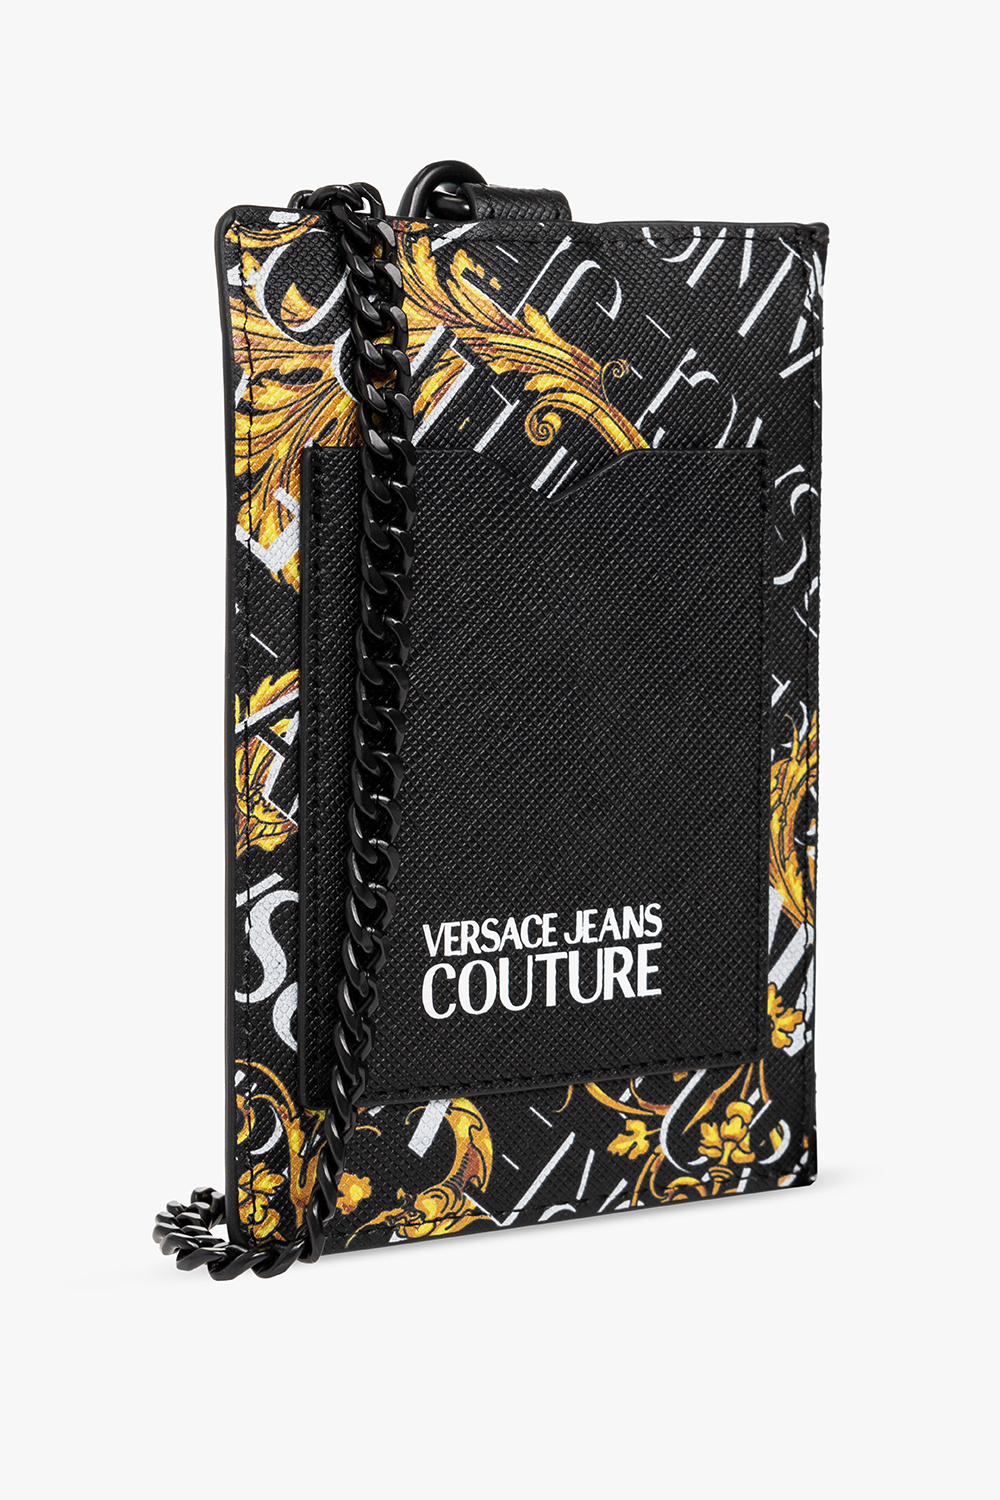 Versace Jeans Couture leggings sport domyos taille